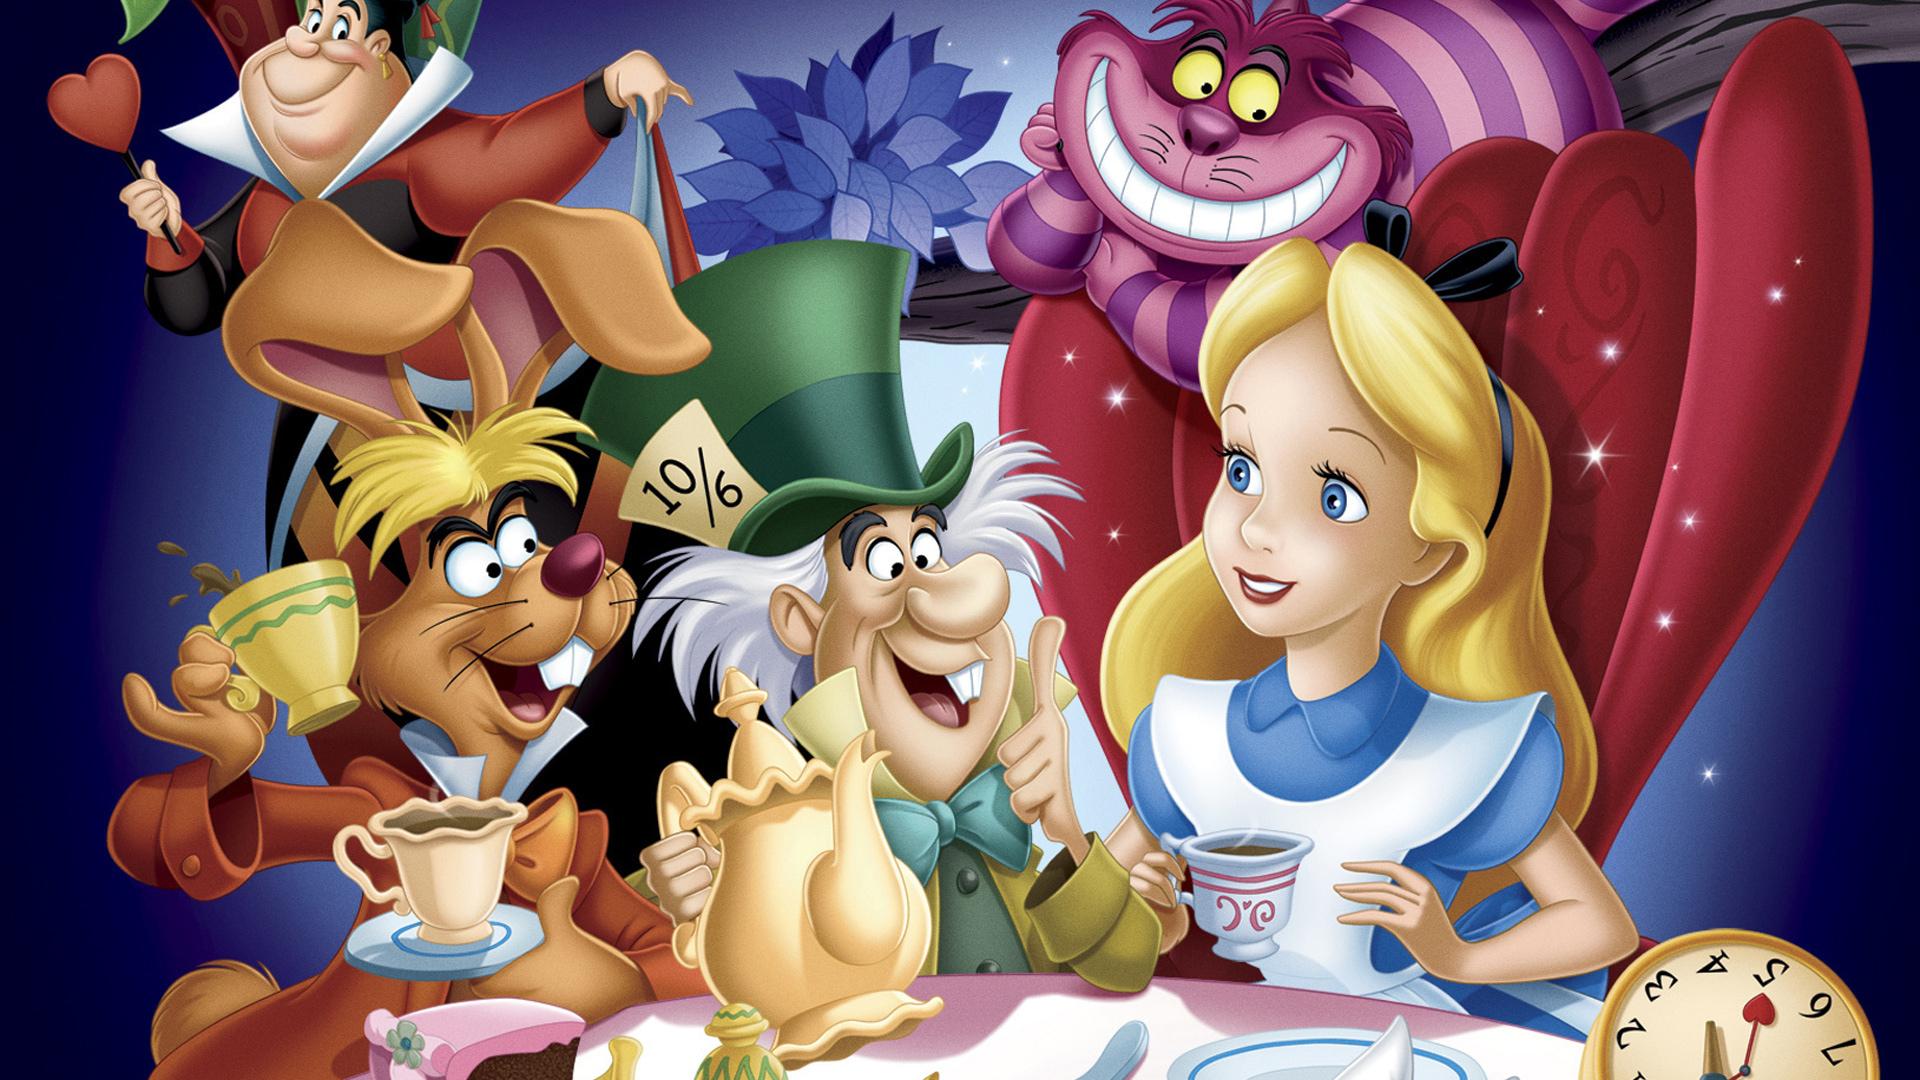 Colorful image of young blonde girl, Alice, surrounded by fantastical characters from the children's classic.